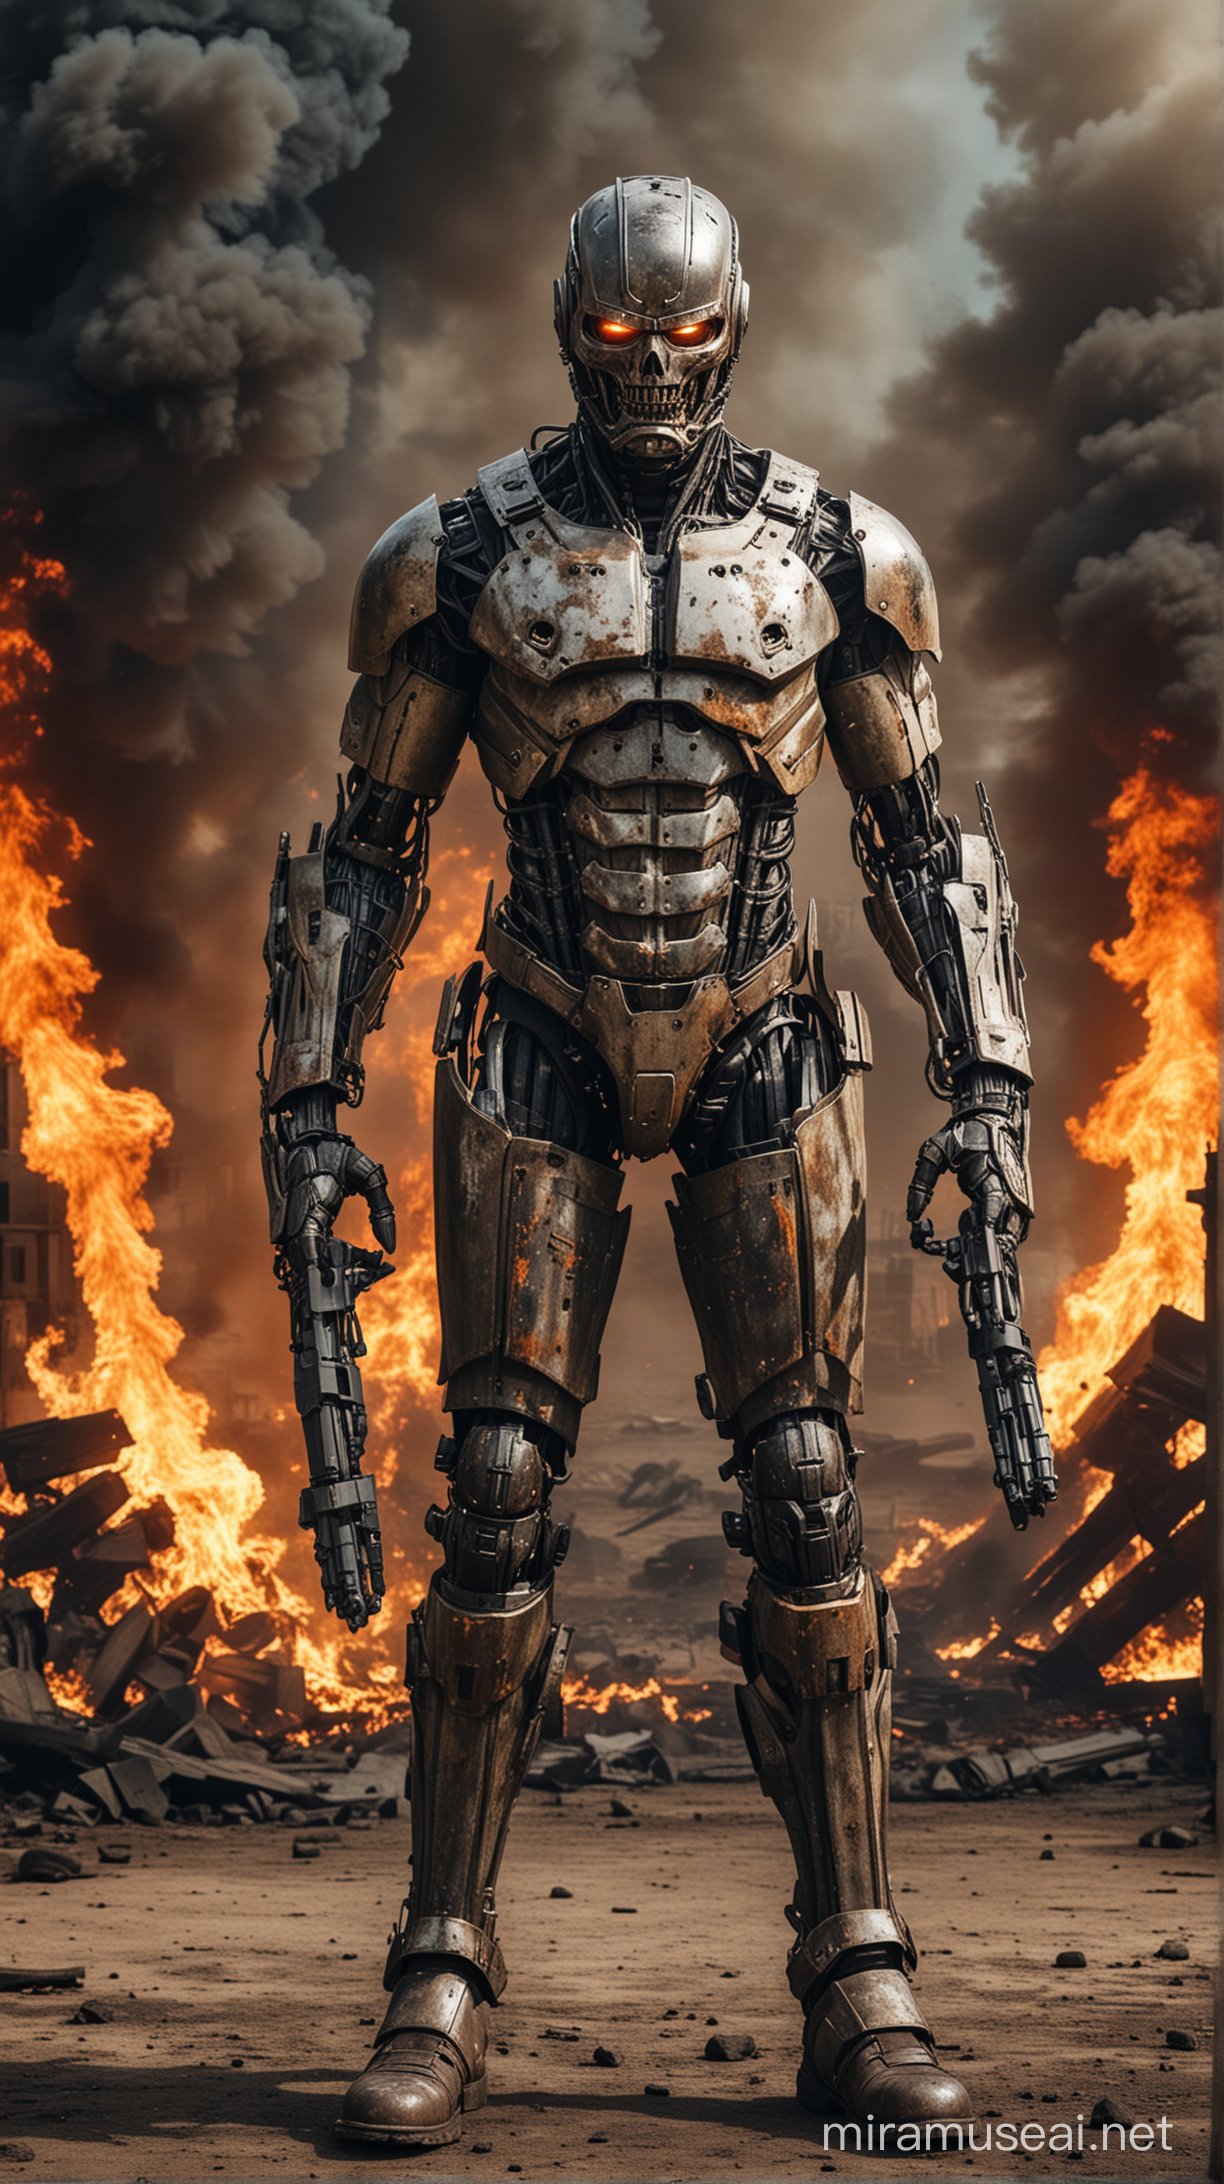 angry half man half machine humanoid portrait with helmet, full body with a war and slavery on fire scene on the background